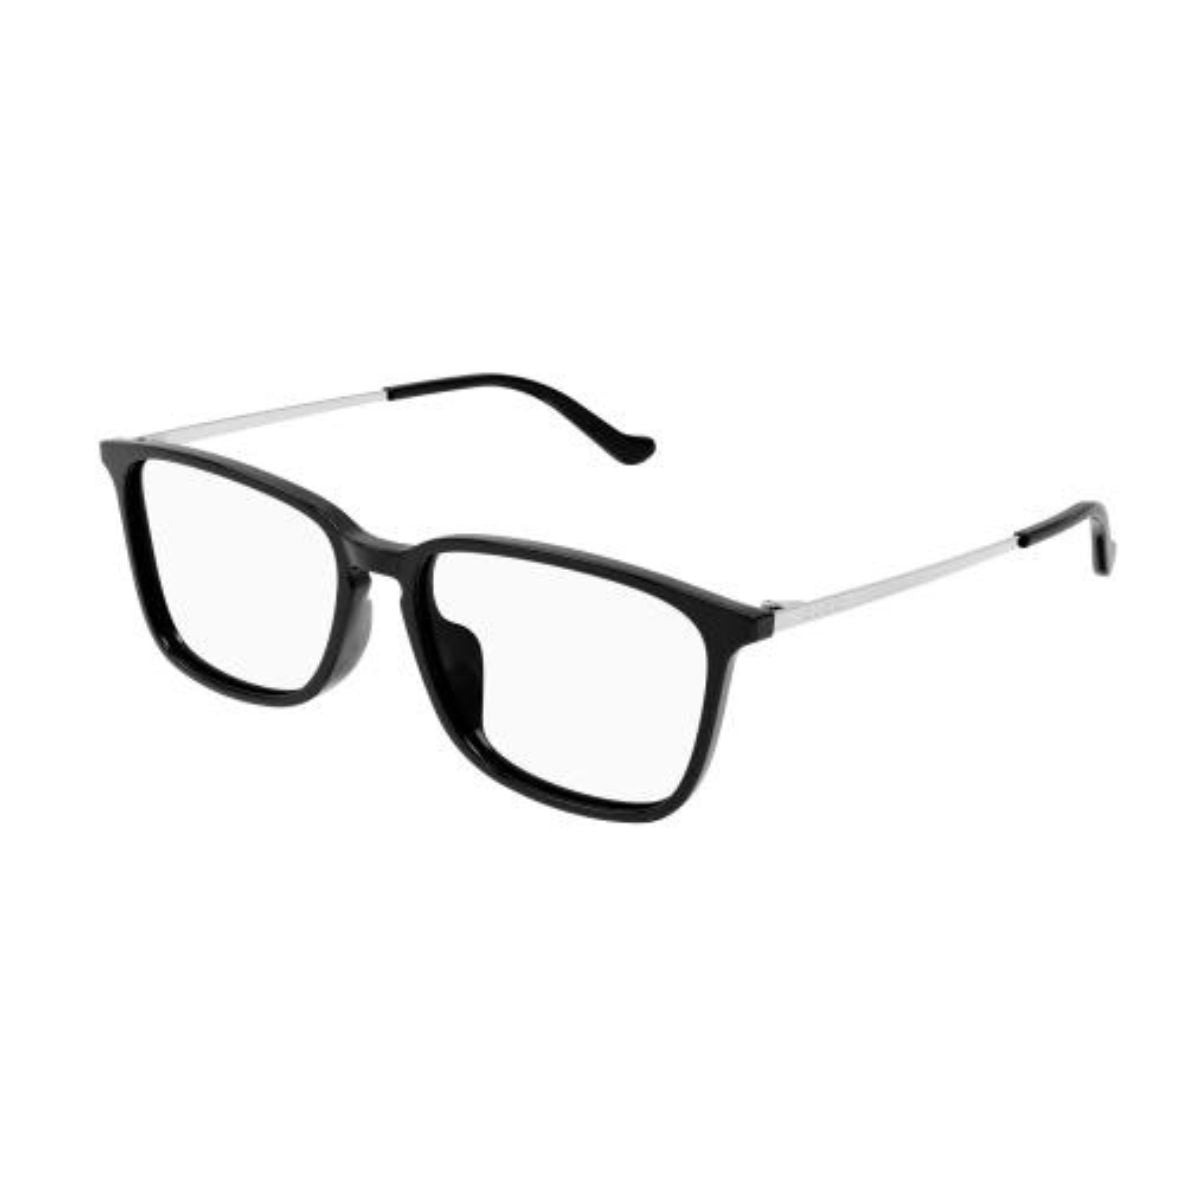 "Gucci GG1609OA 002 spectacle frame for men's online at optorium"